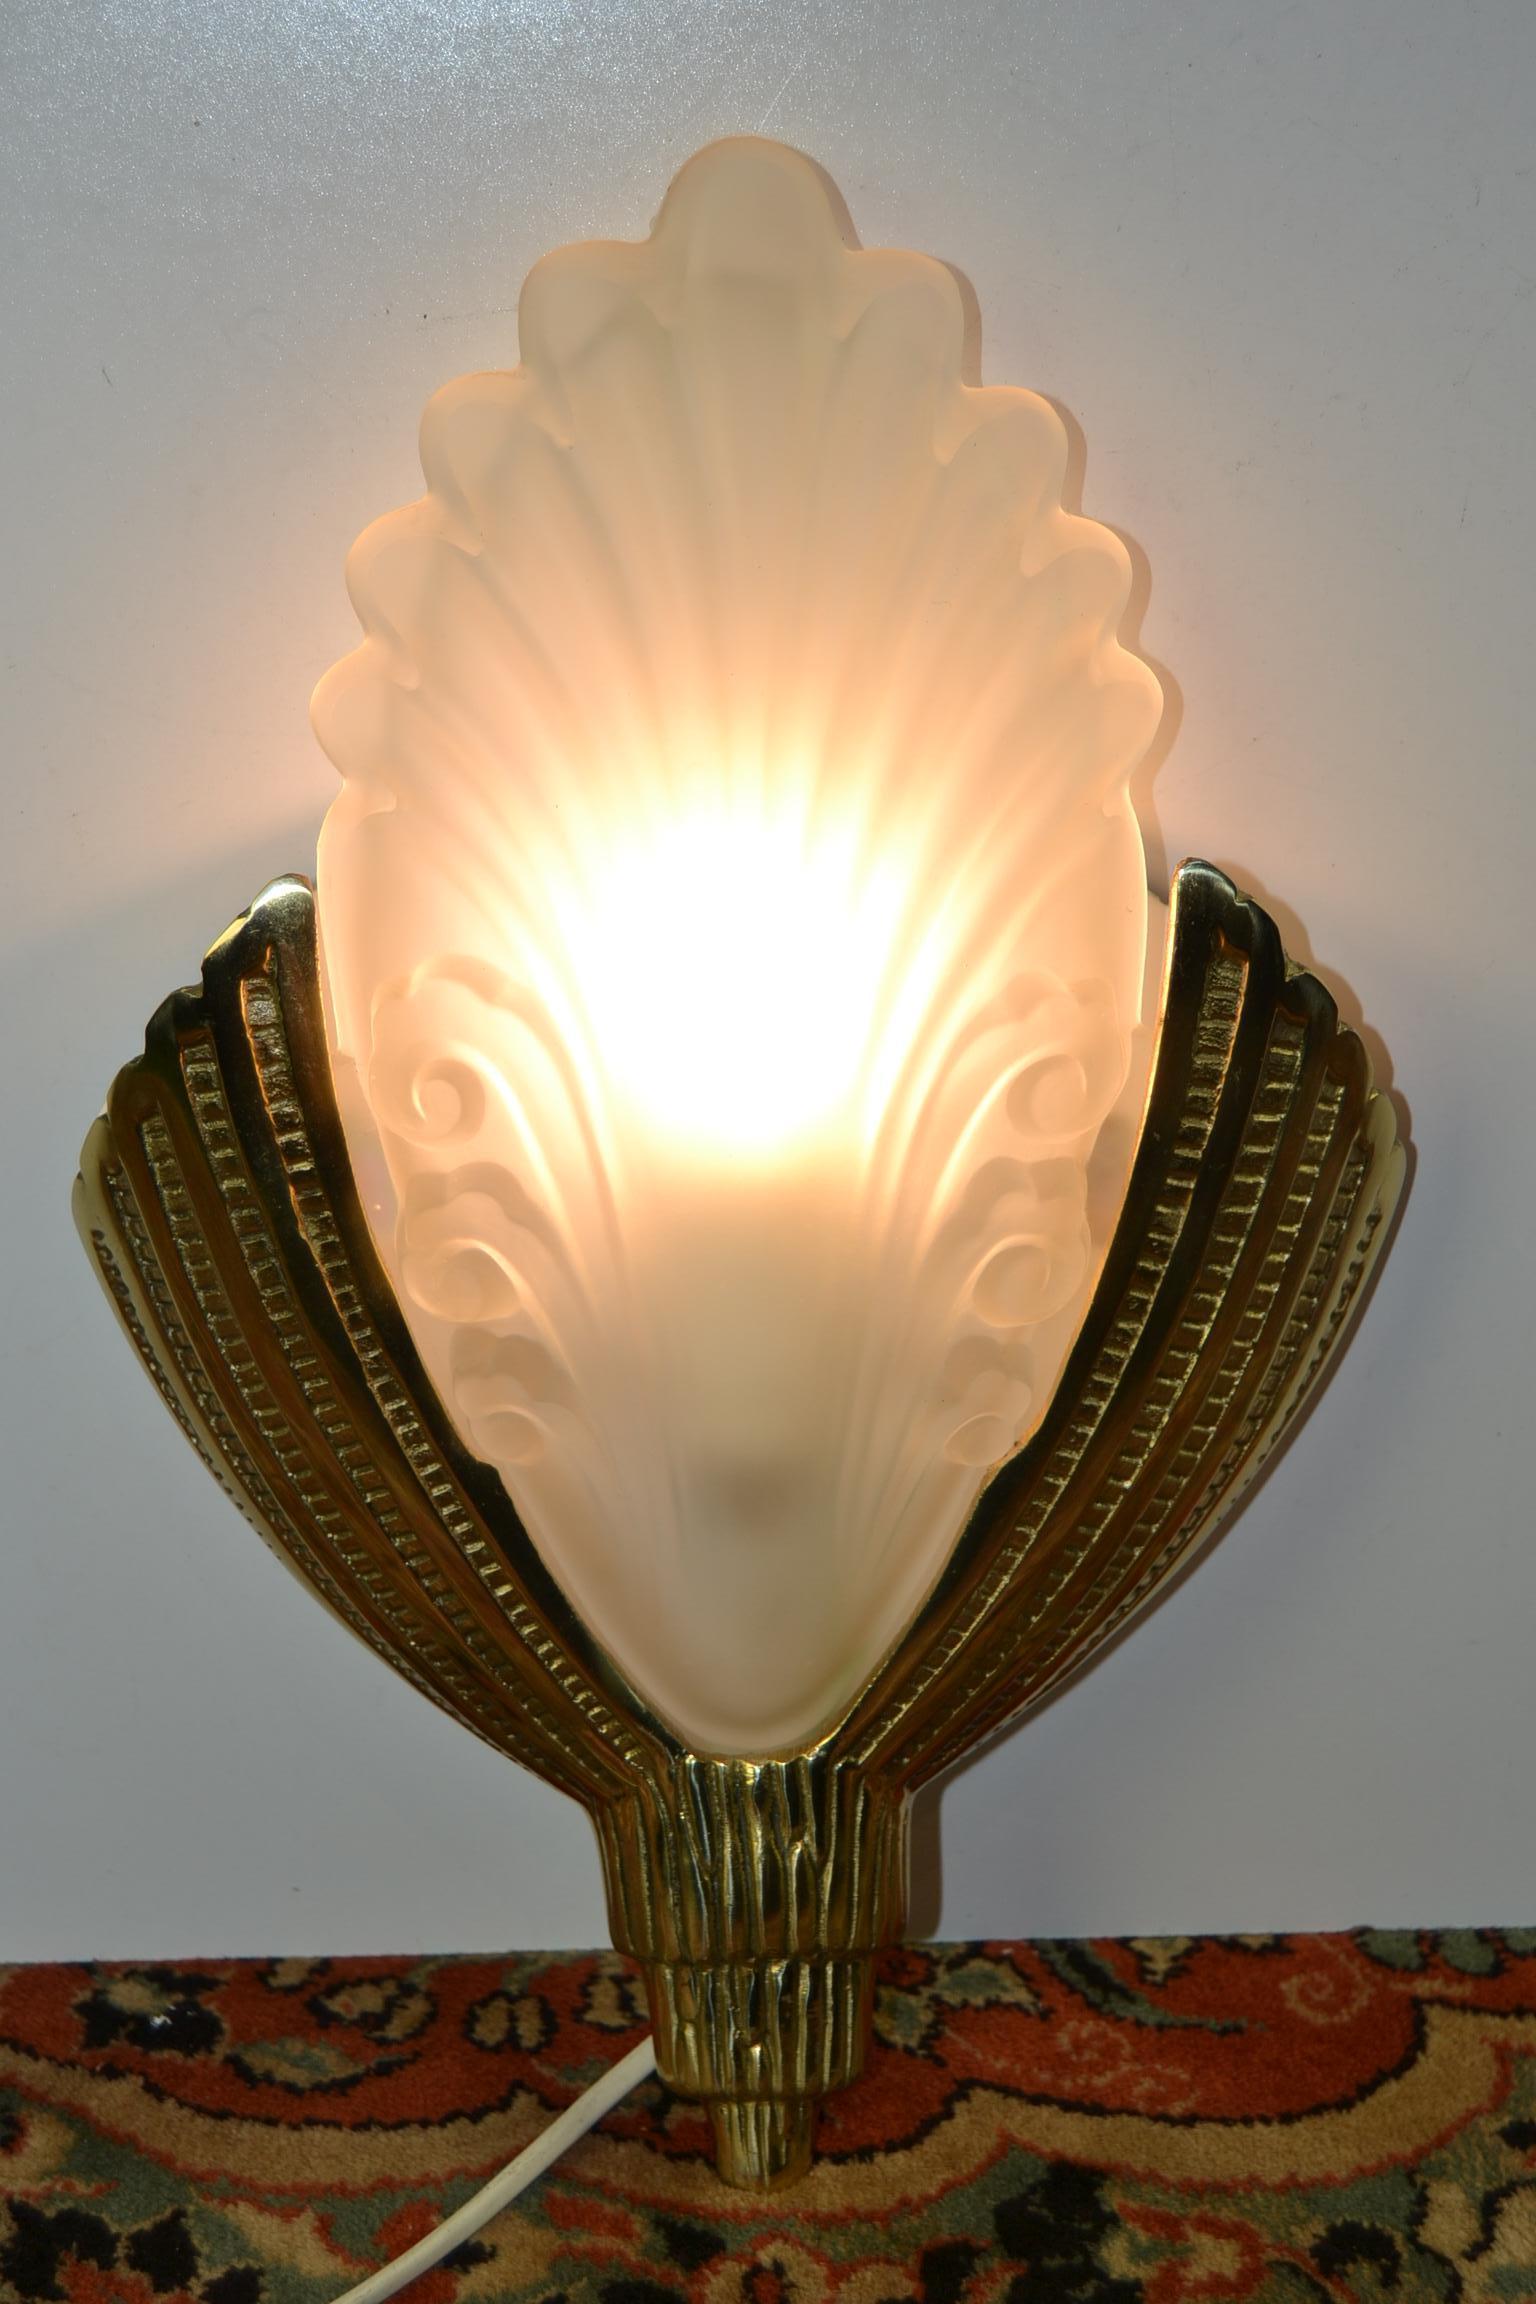 1960s Art Deco style Wall Light - Wall Lamp - Wall Scone , 
made of Brass with Frosted Glass Shade.
The shade has the shape of a Leaf.
Art Deco Style - Regency Style. 
Gold light with frosted glass.

Elegant and Stylish wall light for bathroom -